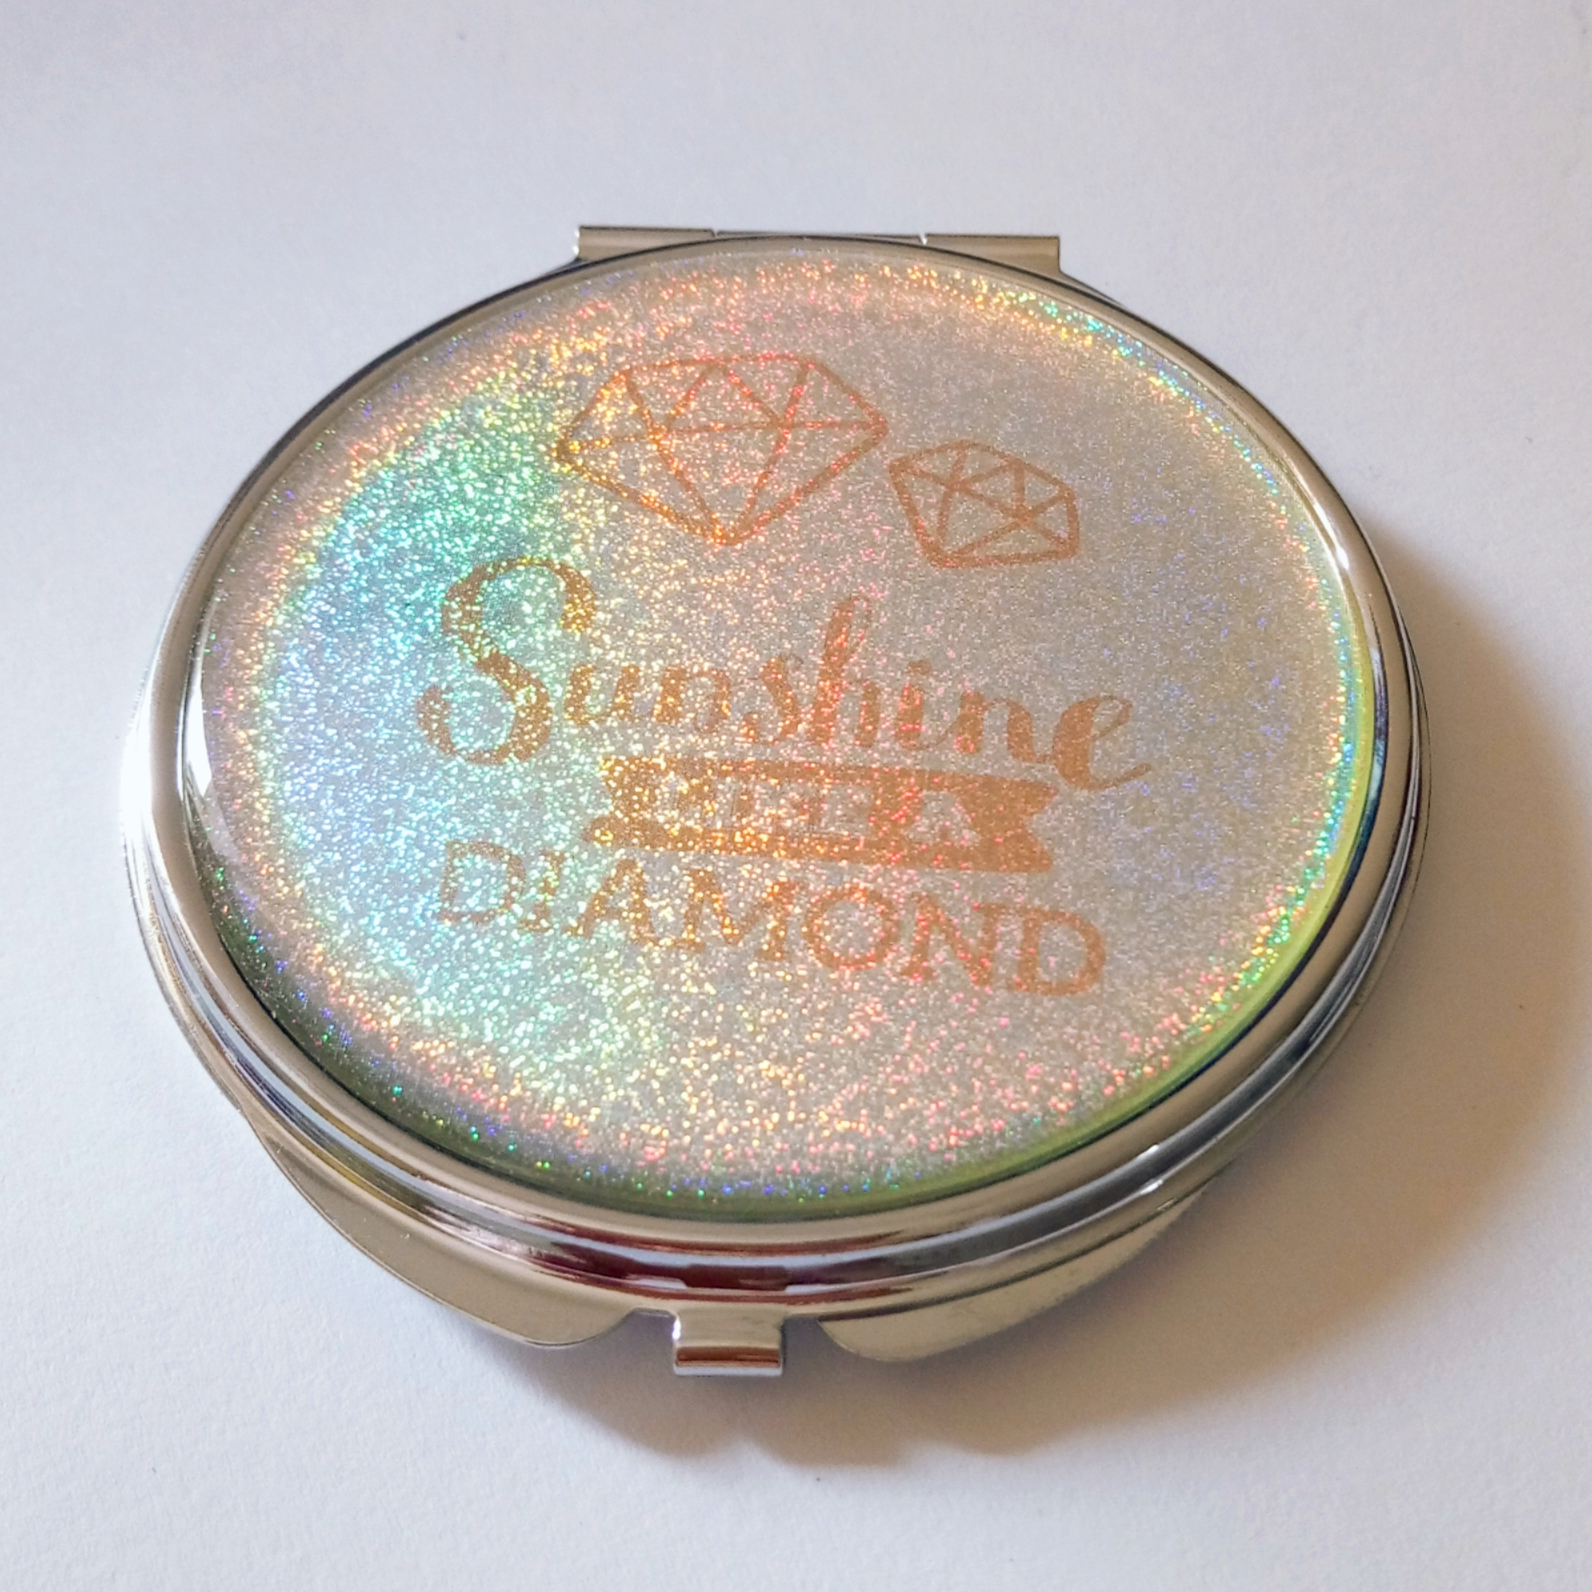 chrome plated compact mirror with laser color effect for poorsight makeup